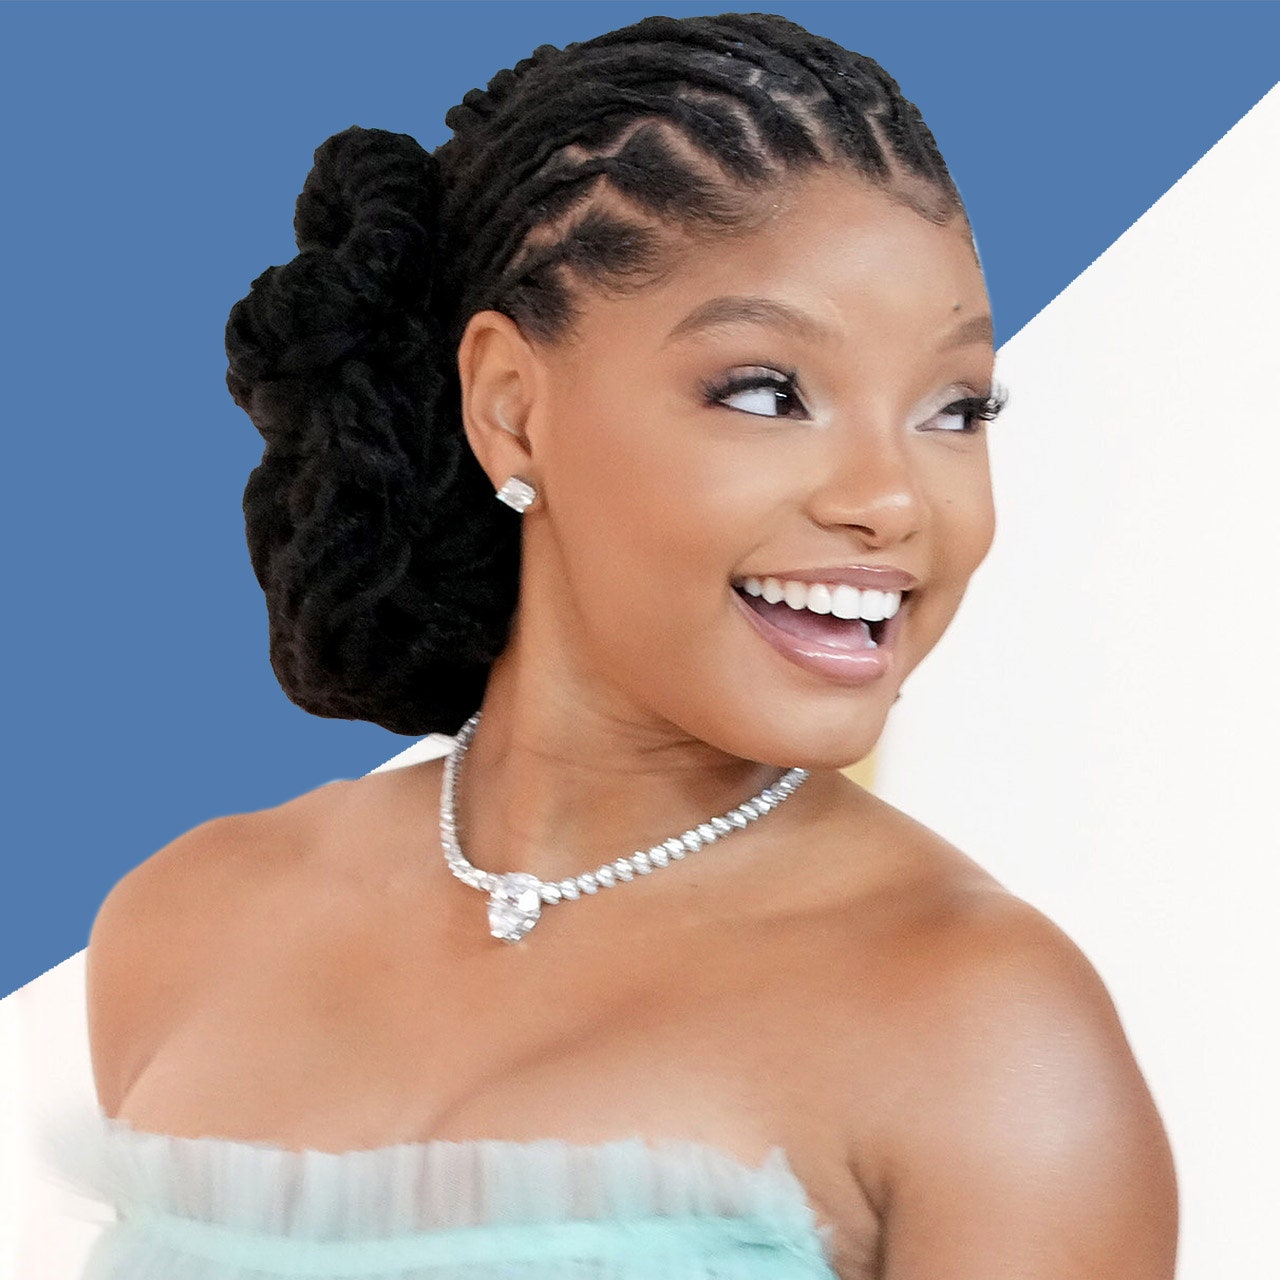 Halle Bailey's XXL ponytail makes her look five inches taller than she actually is